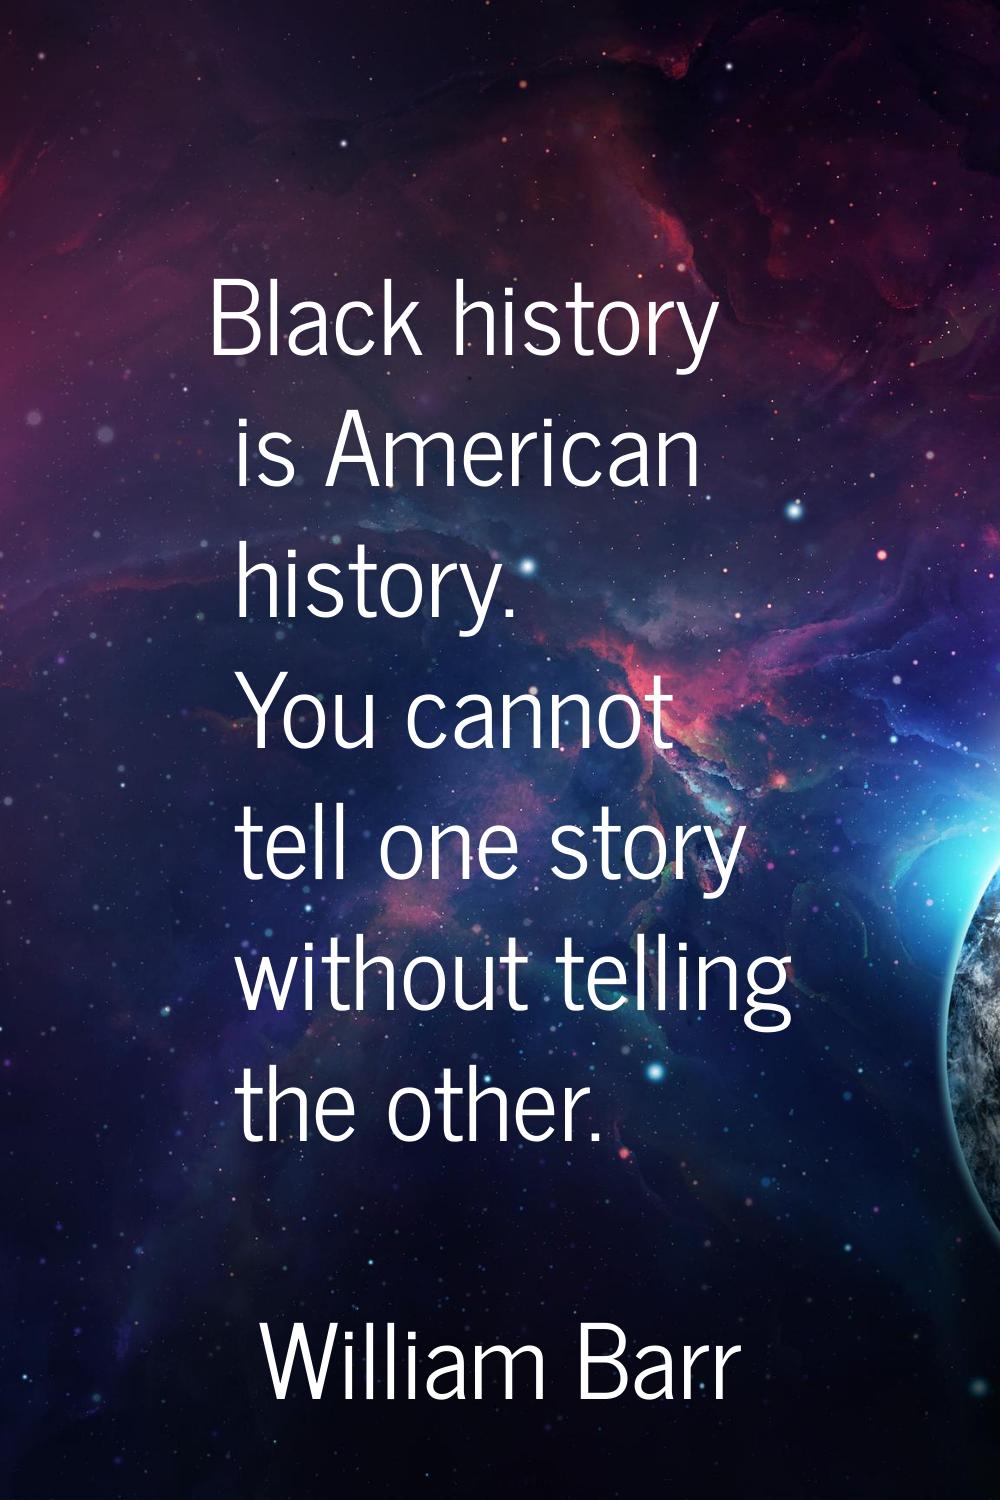 Black history is American history. You cannot tell one story without telling the other.